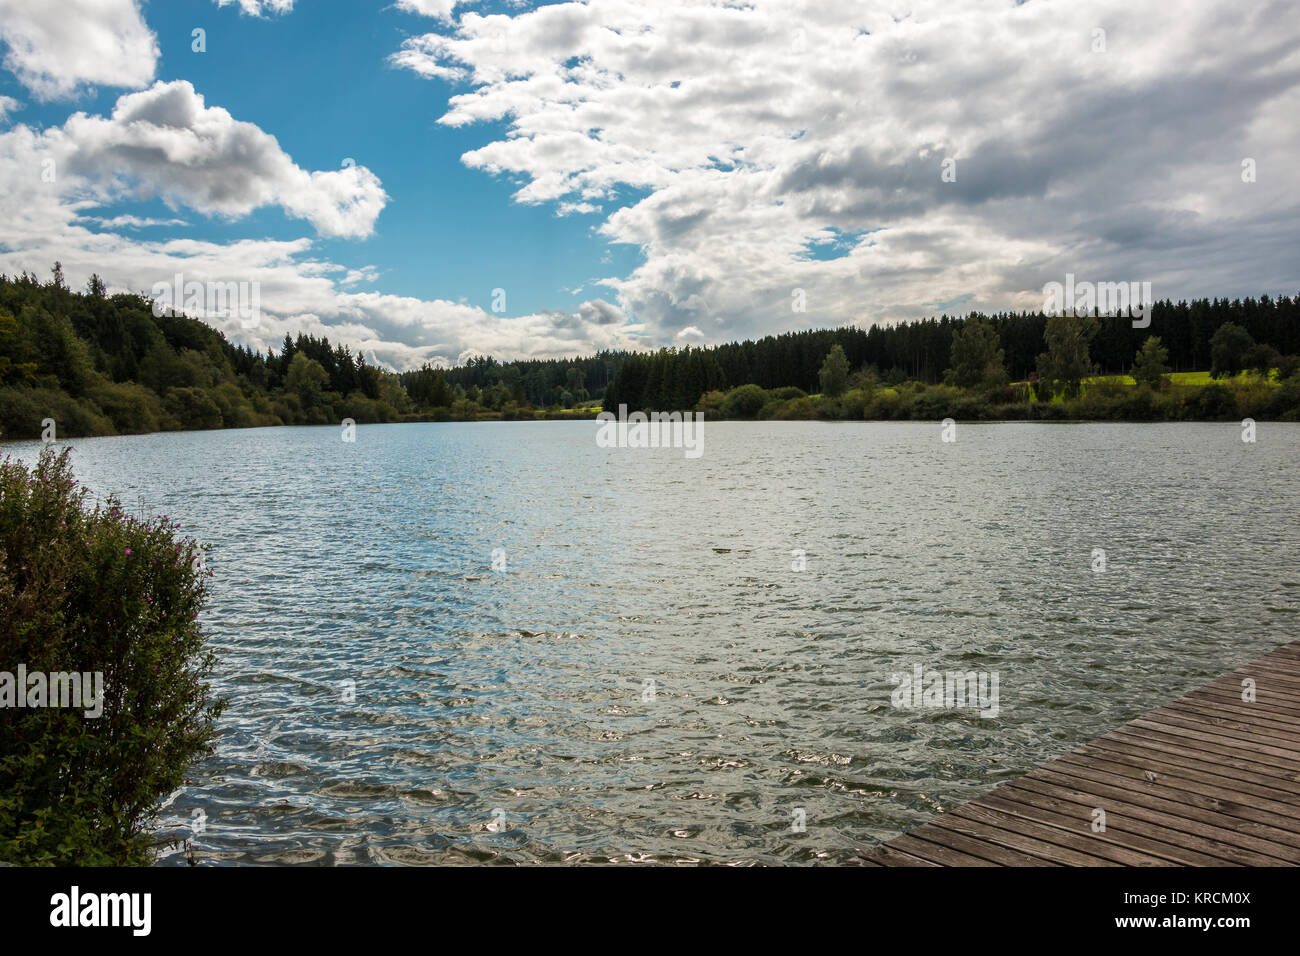 Lonely lake with reflections in the water and forests around and blue sky with clouds Stock Photo